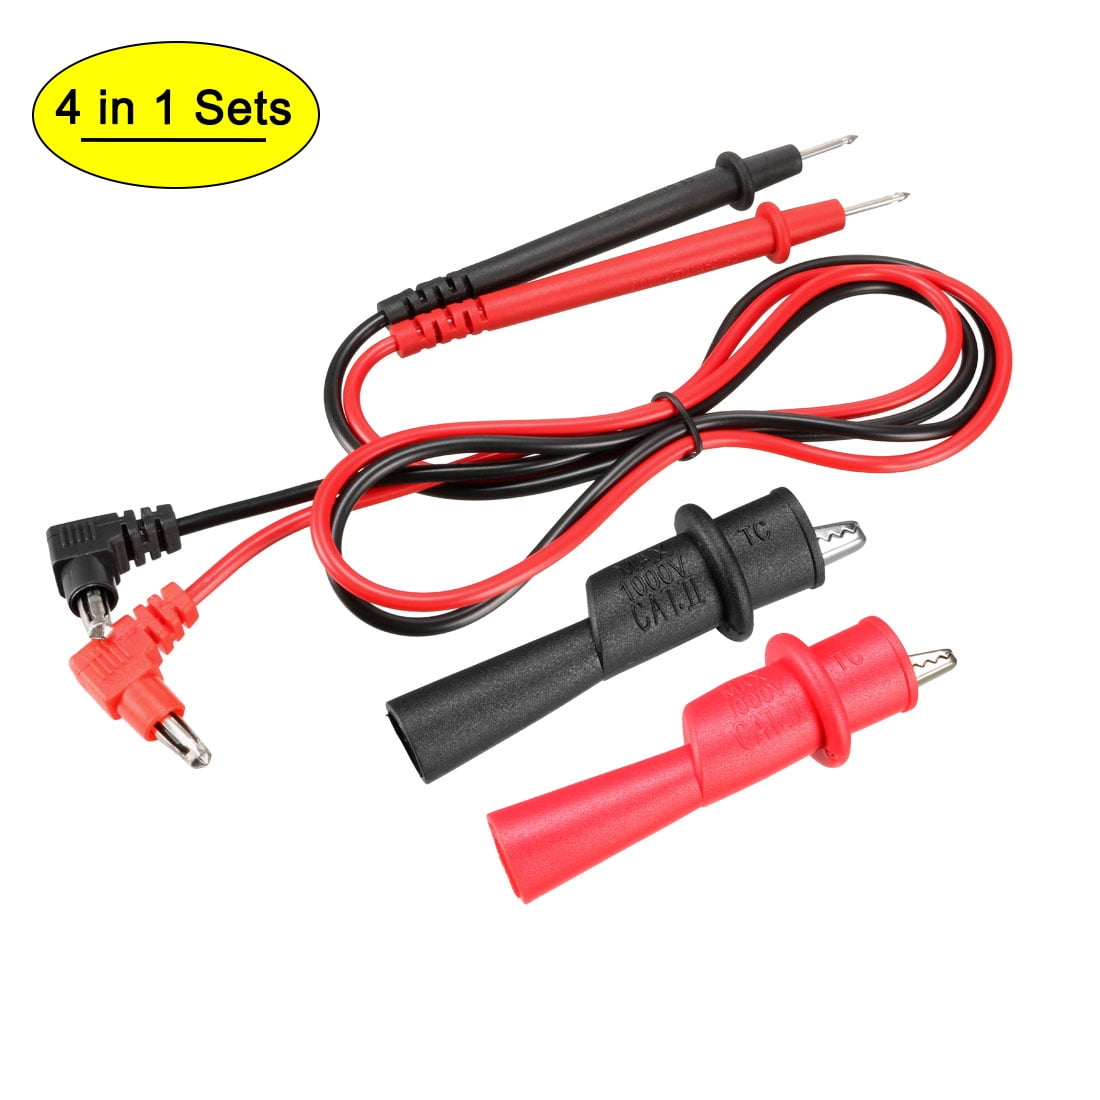 2mm Banana Plug To Test Hook Clip Probe Cable For Multimeter Test Equipment 